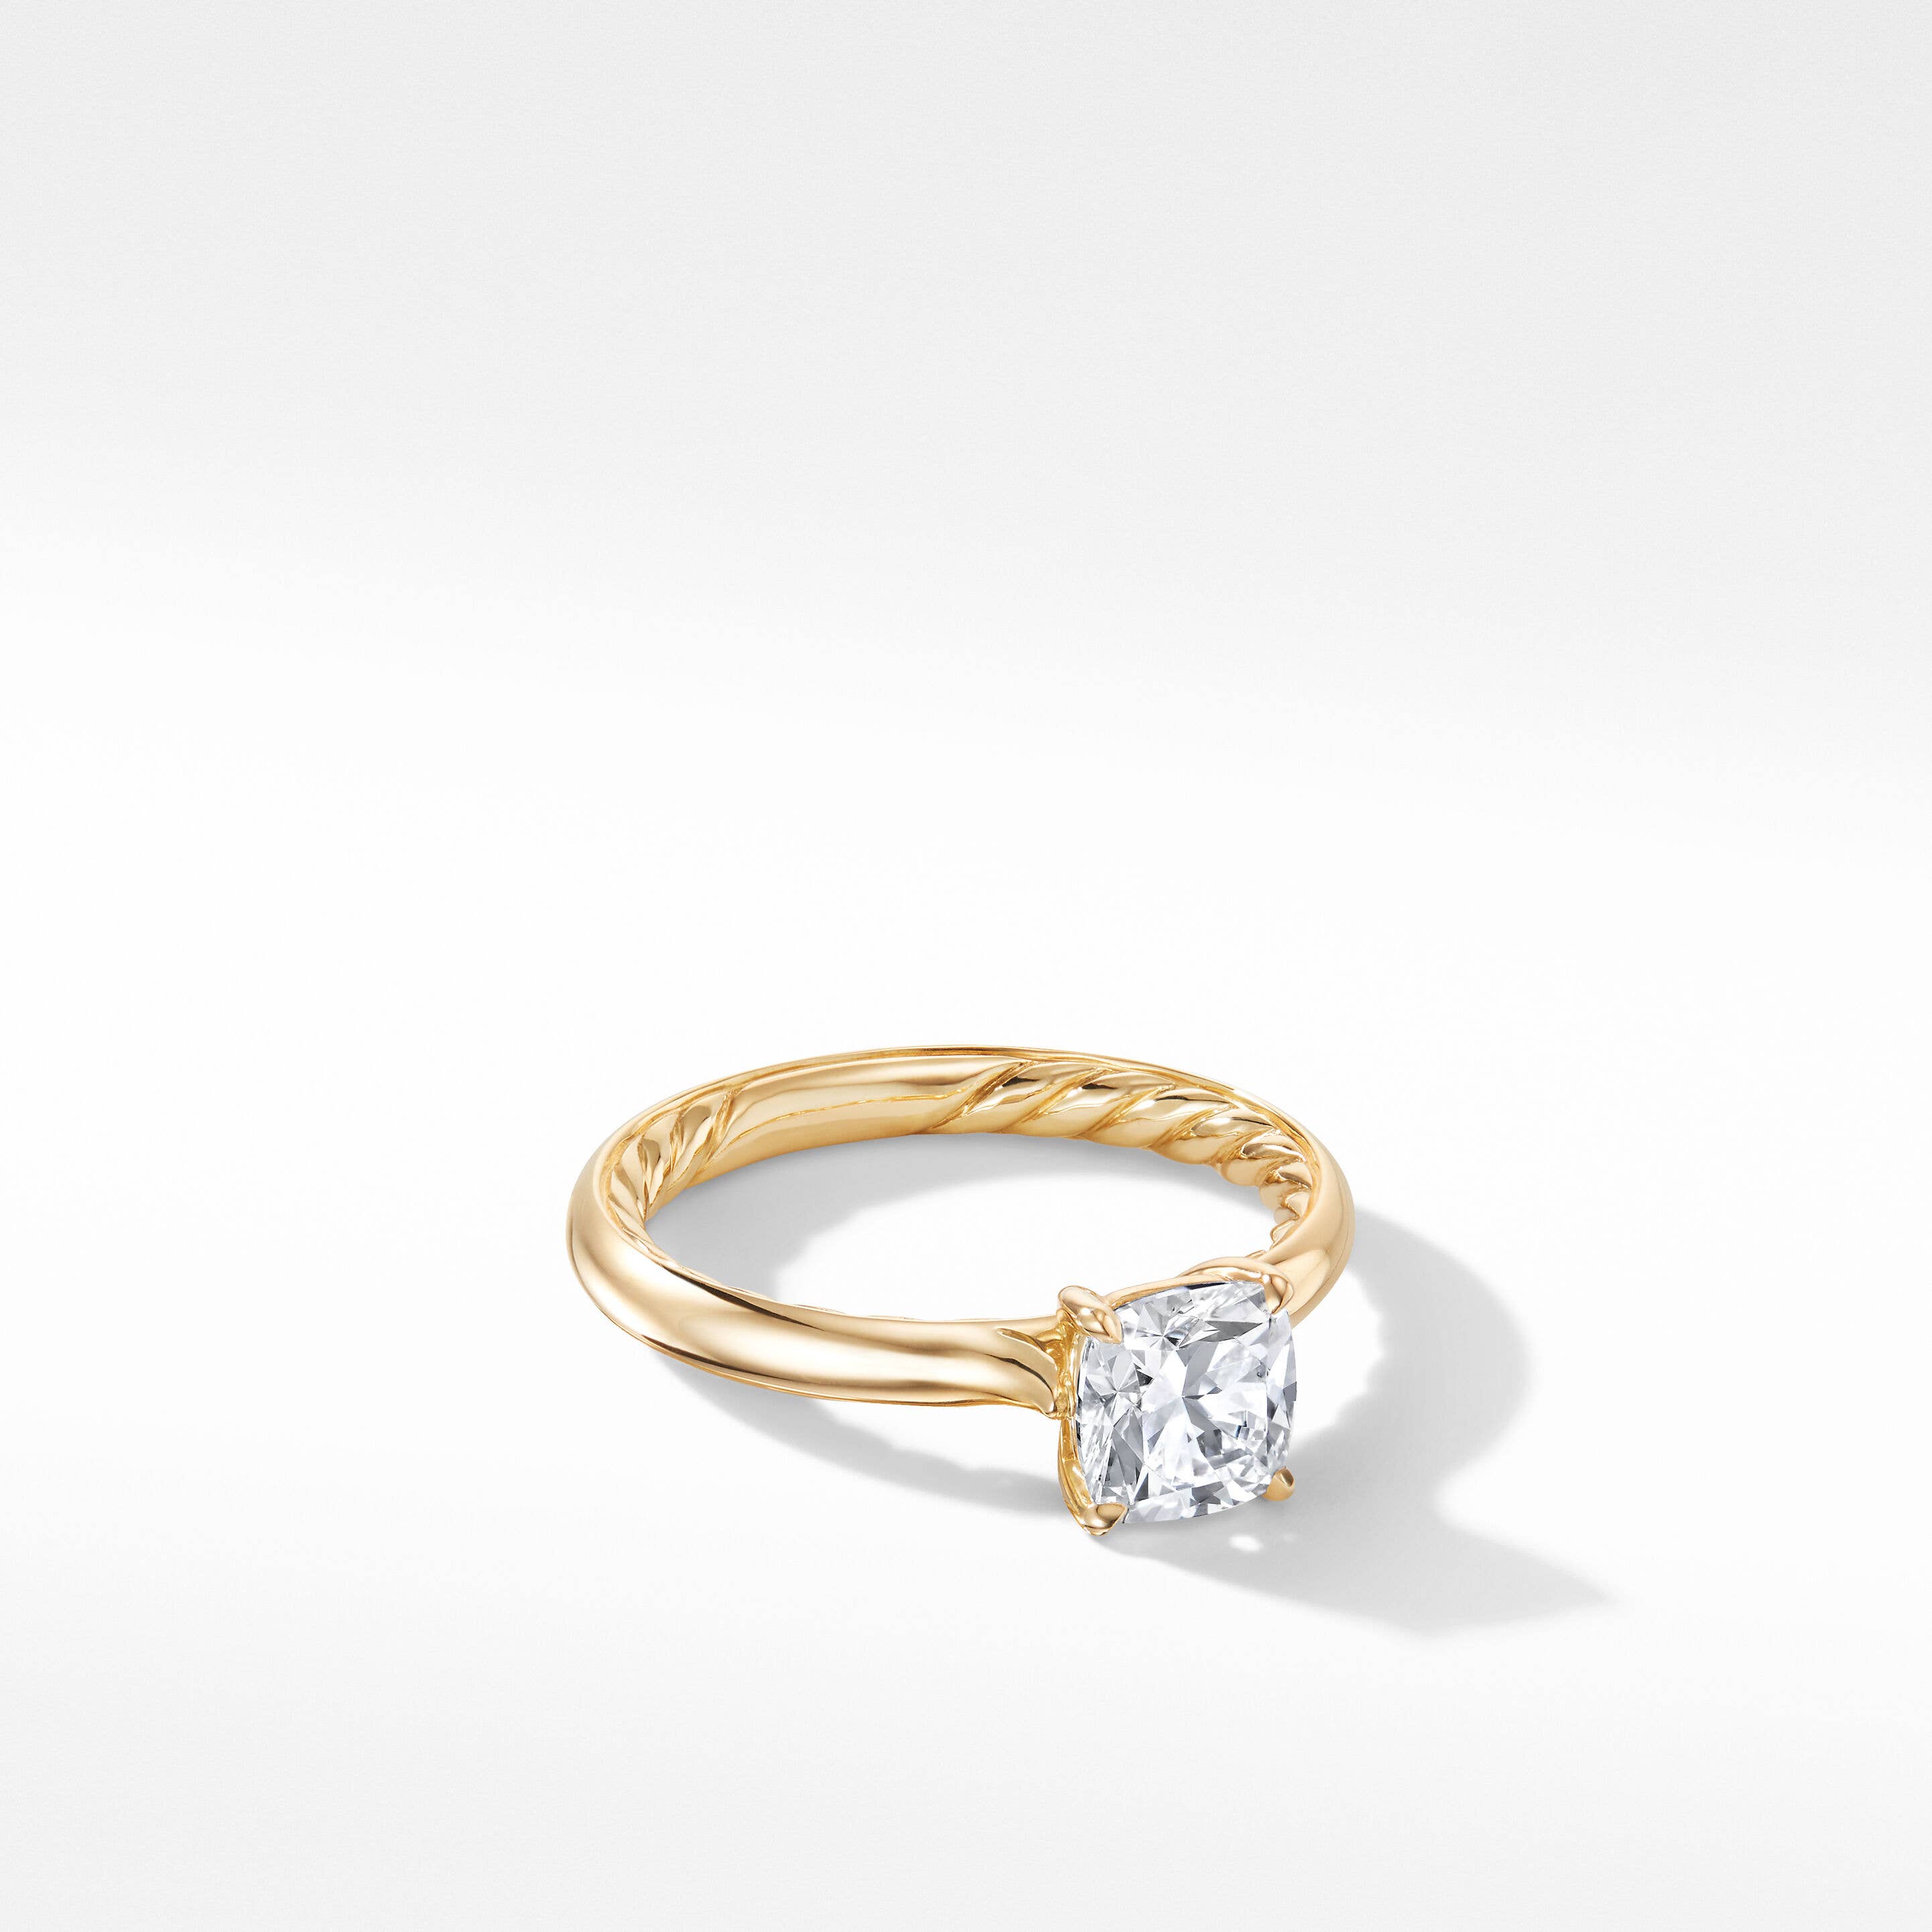 DY Eden Engagement Ring in 18K Yellow Gold, Cushion